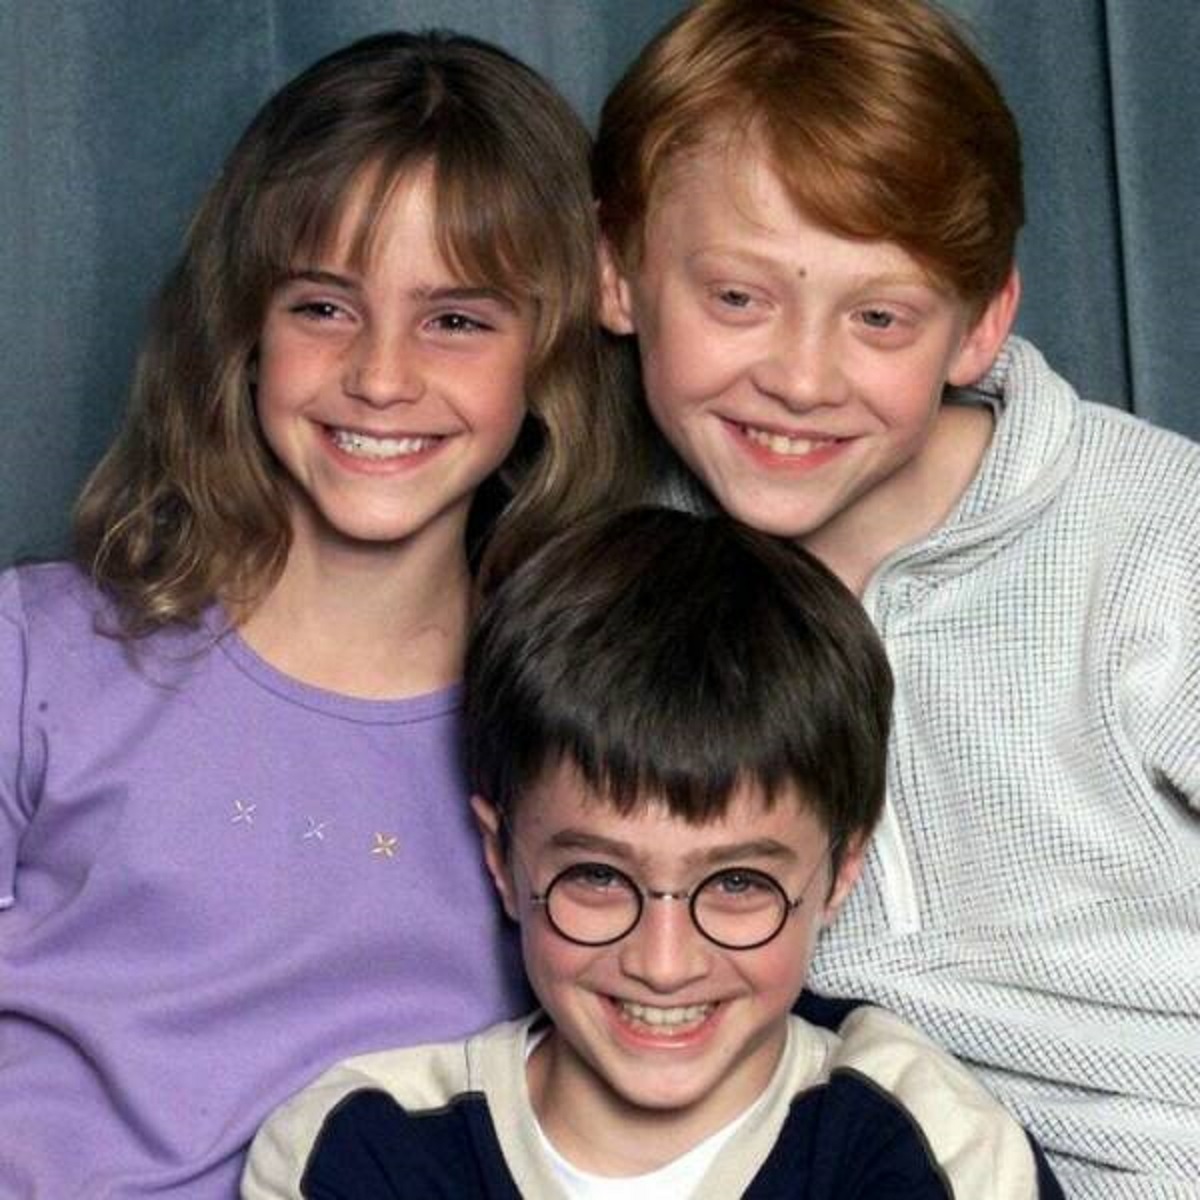 "22 Years Ago, Daniel Radcliffe, Rupert Grint And Emma Watson Attended A Press Conference To Be Introduced As The Lead Actors In The Harry Potter Movies"